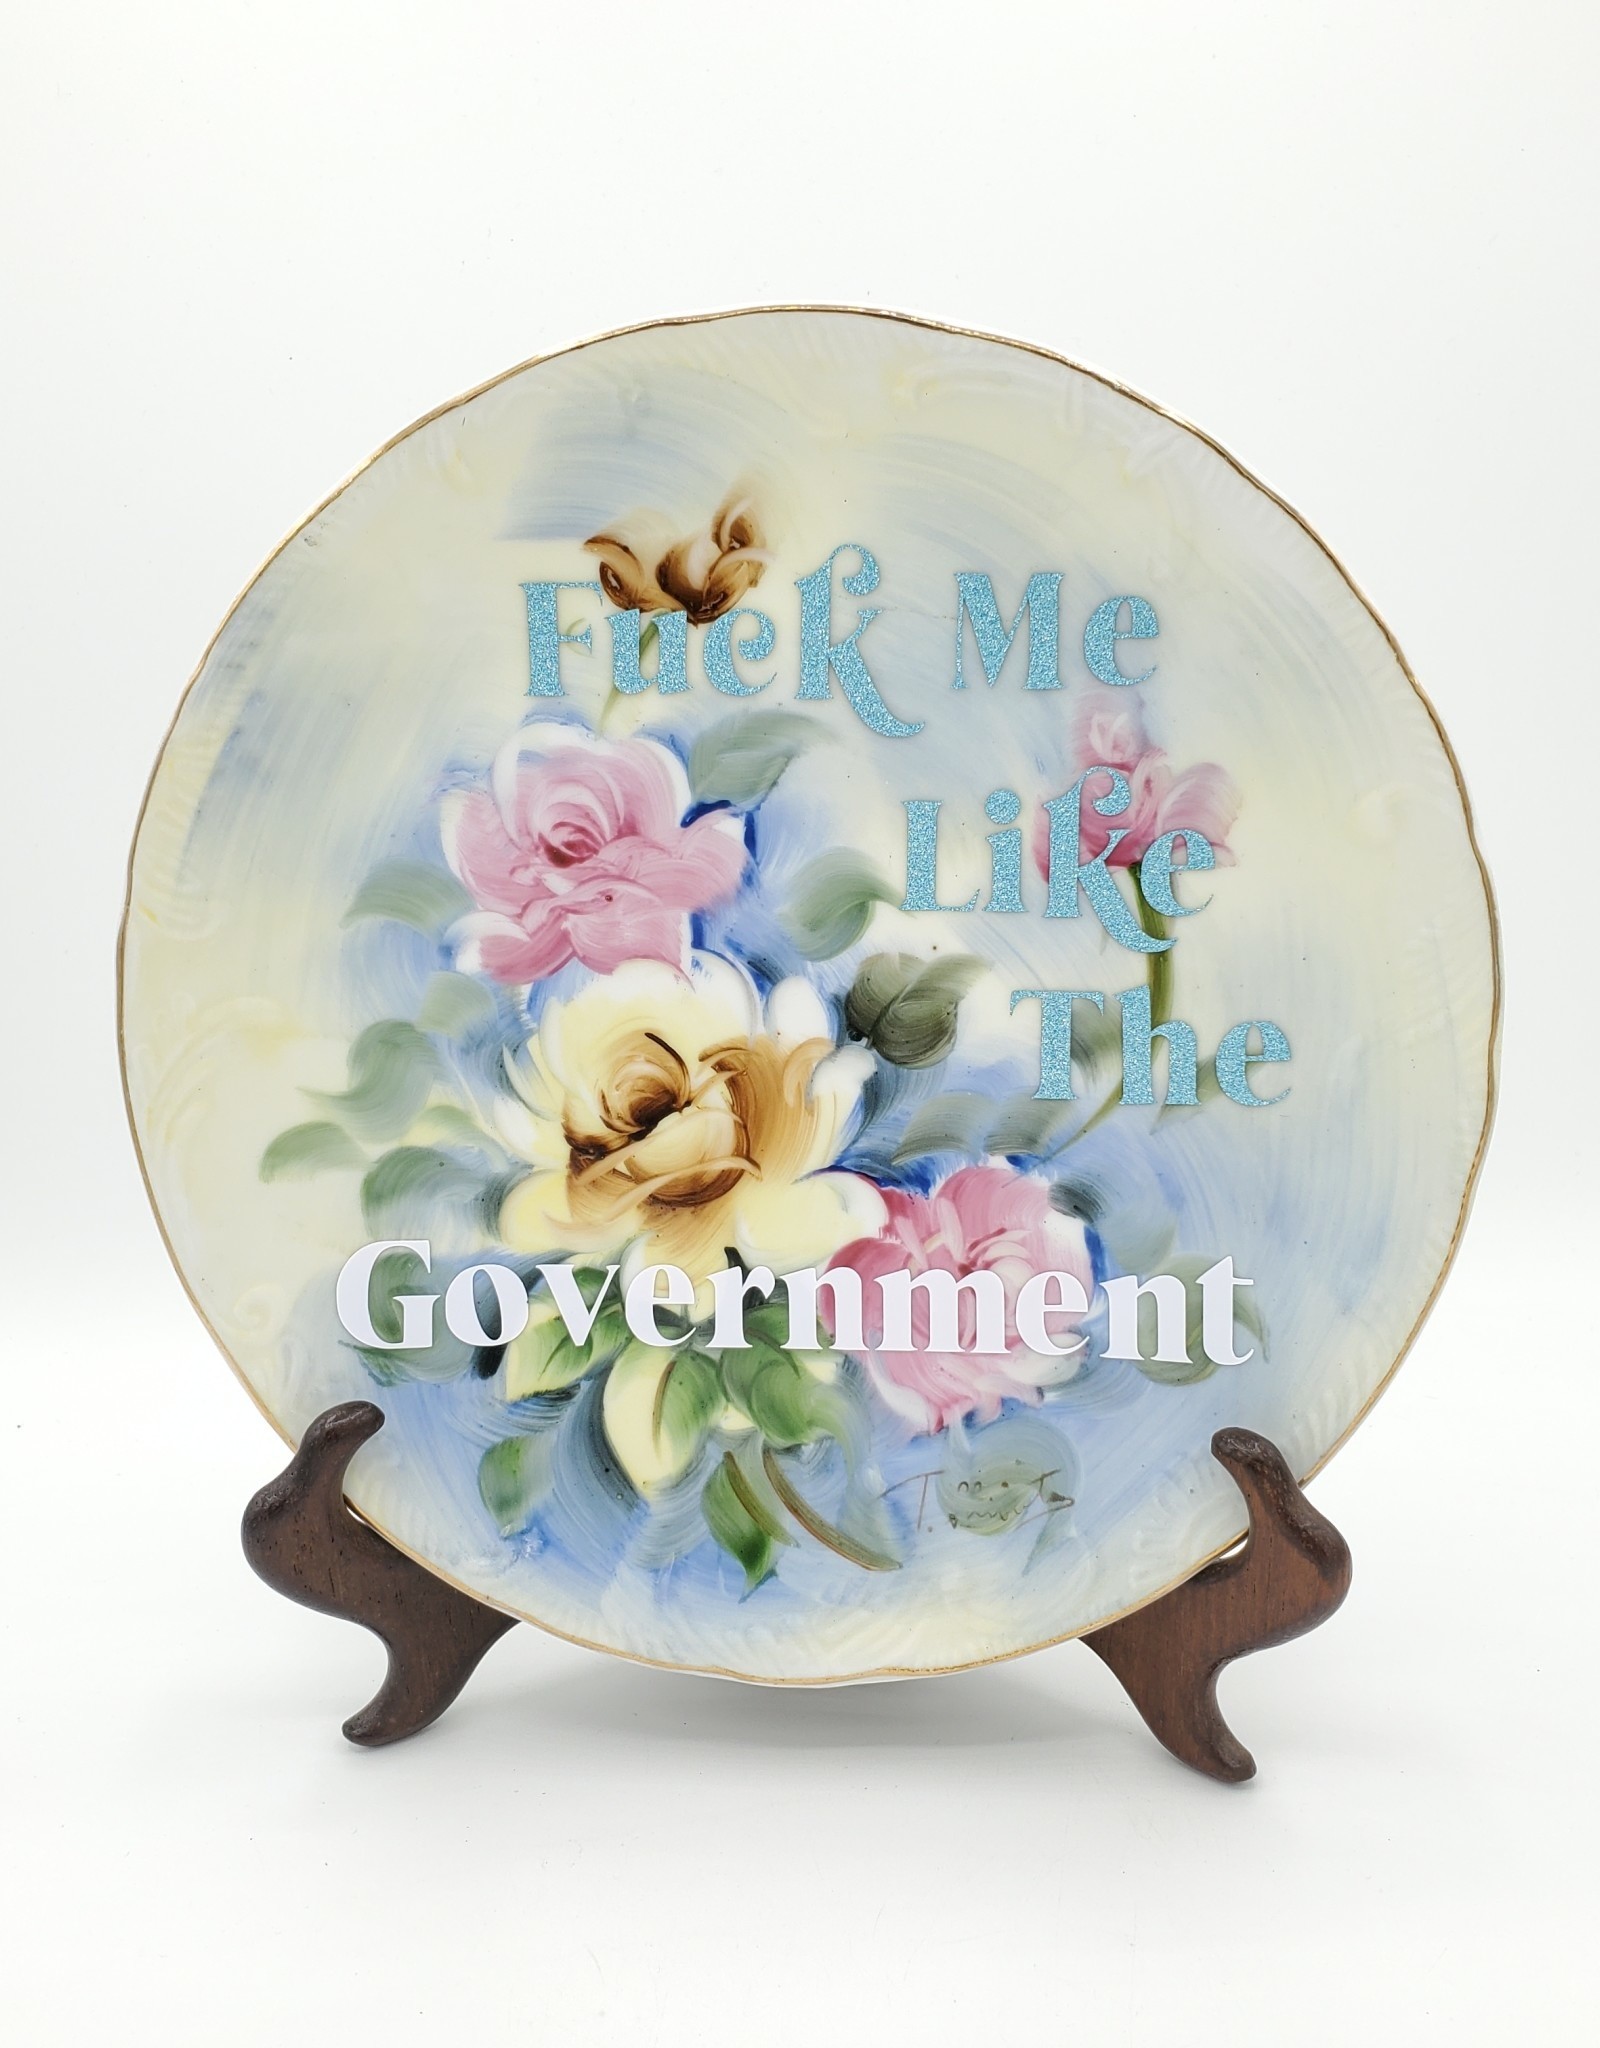 Redux "Fuck Me Like The Government" - Vintage Upcycled Plate Art